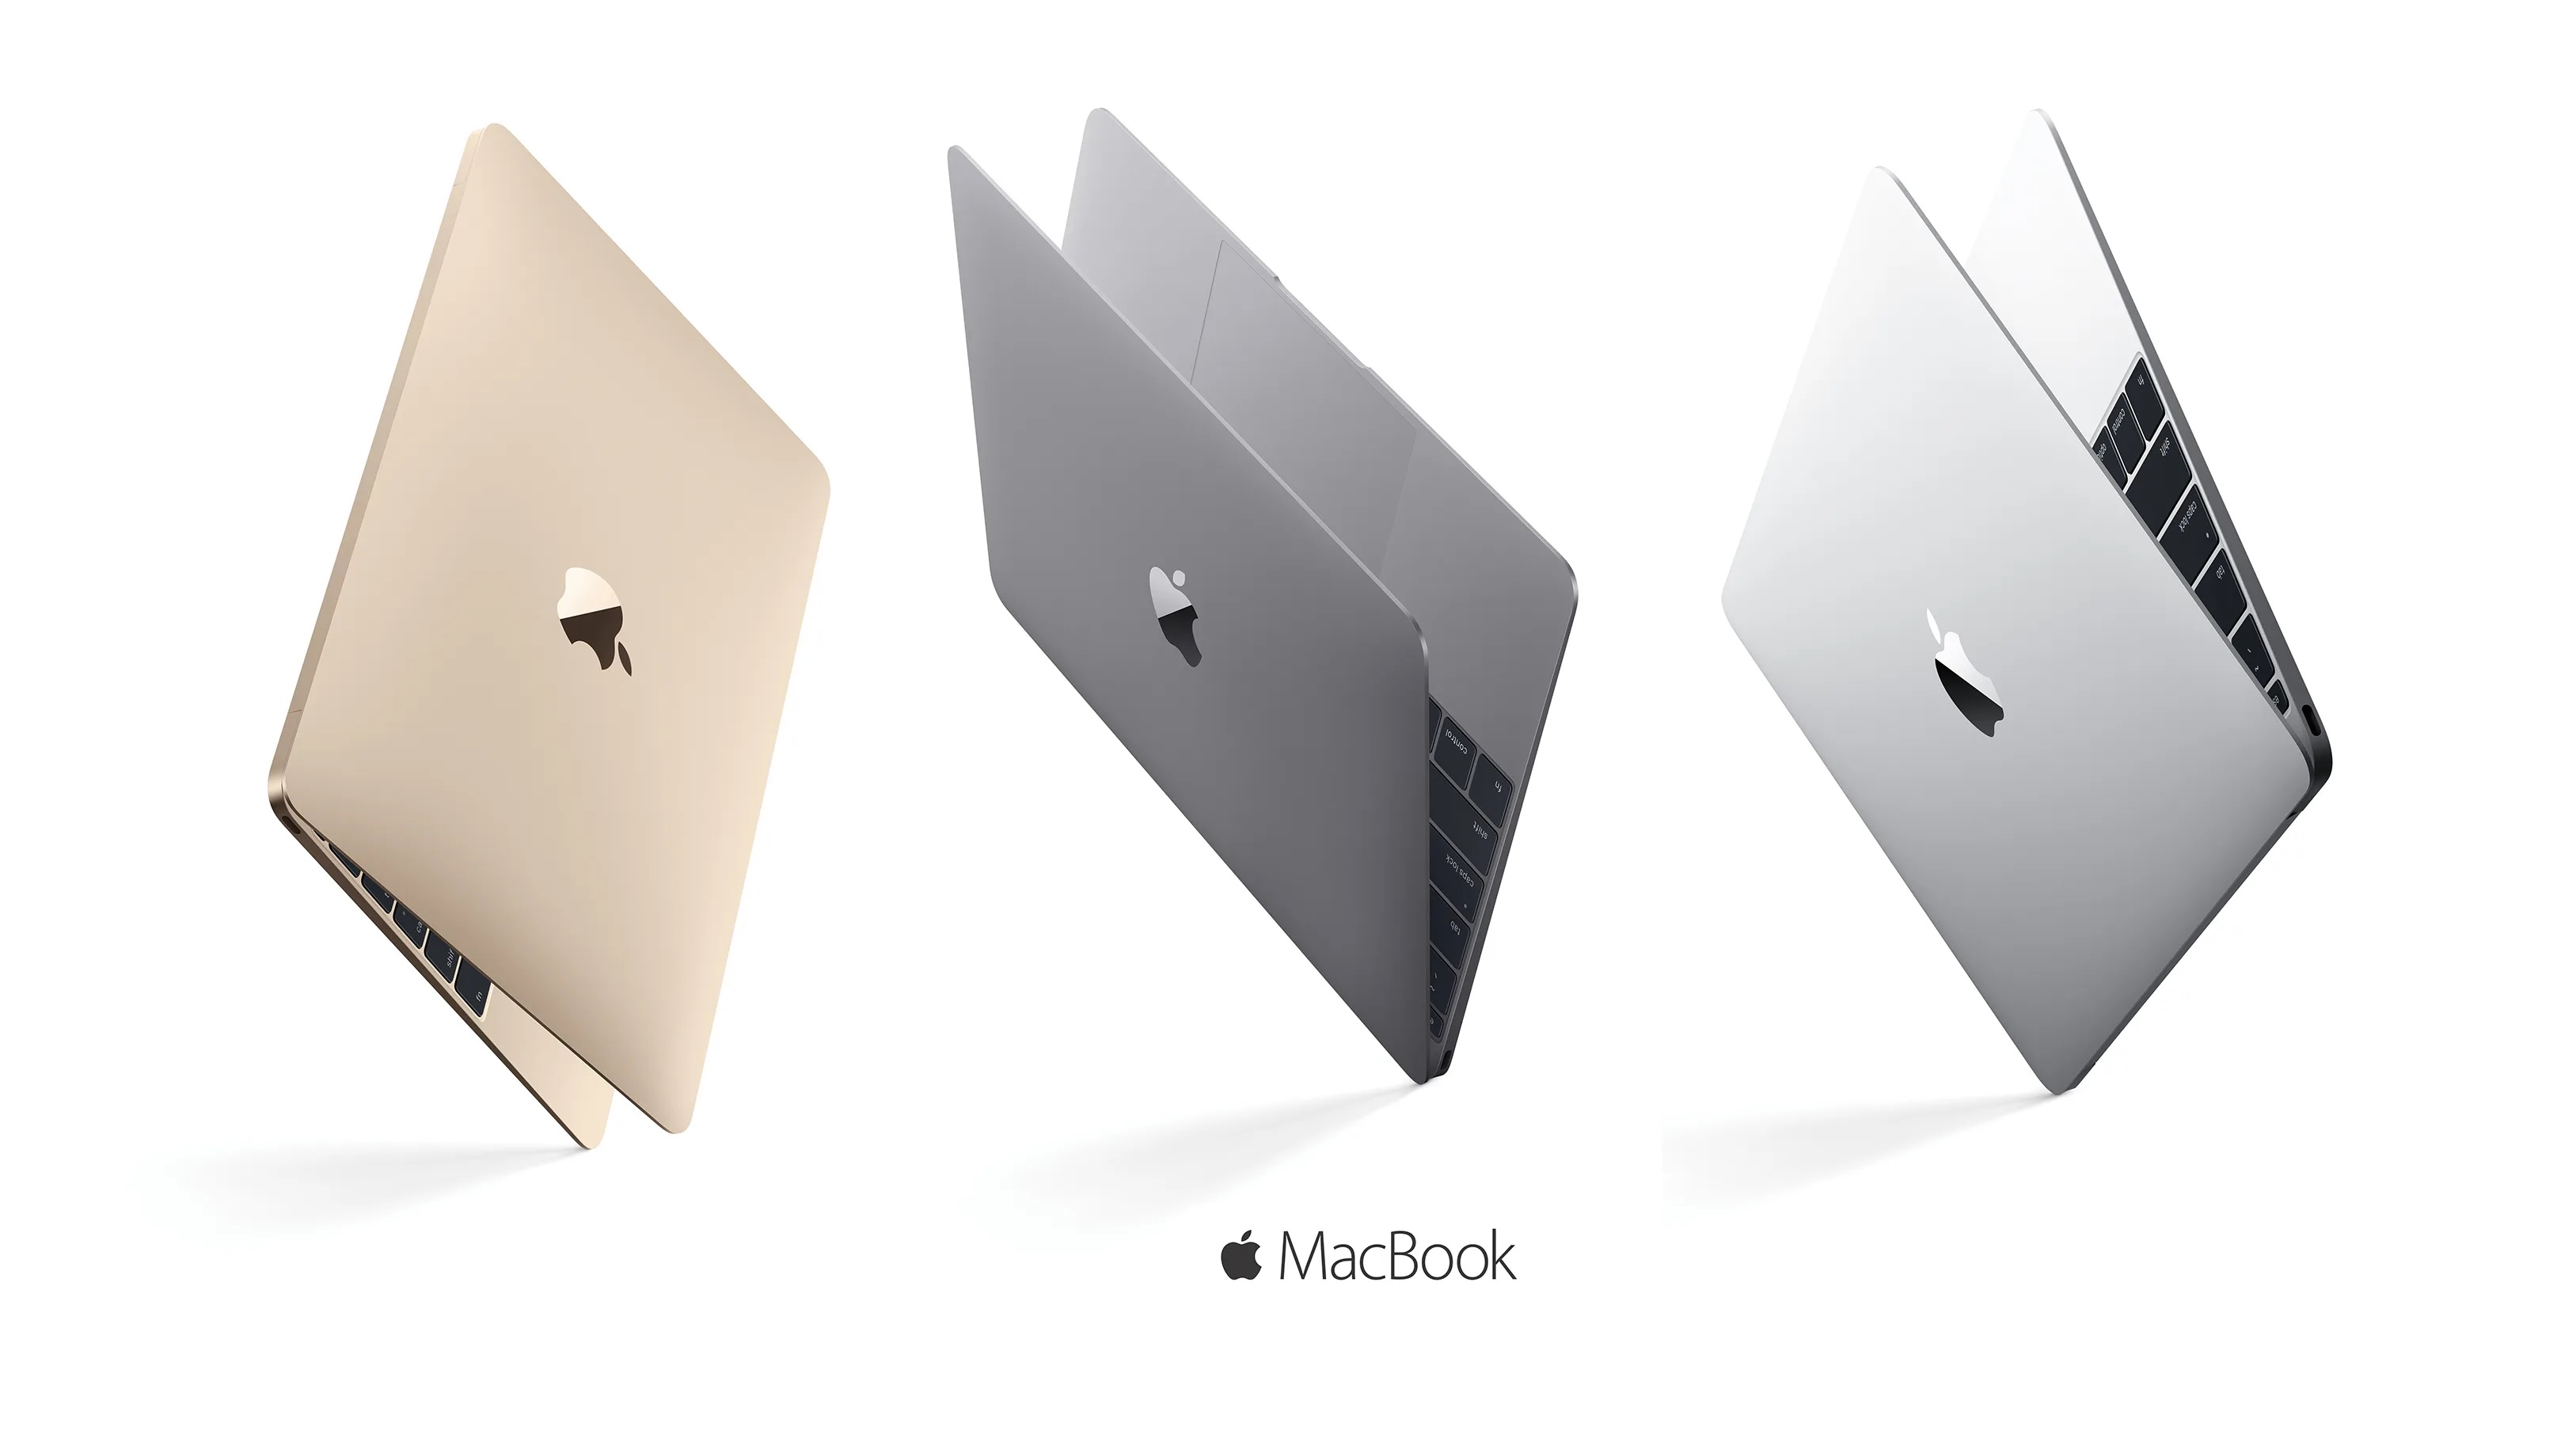 Eight years after its release: Apple recognises the original 12-inch MacBook as a completely obsolete product